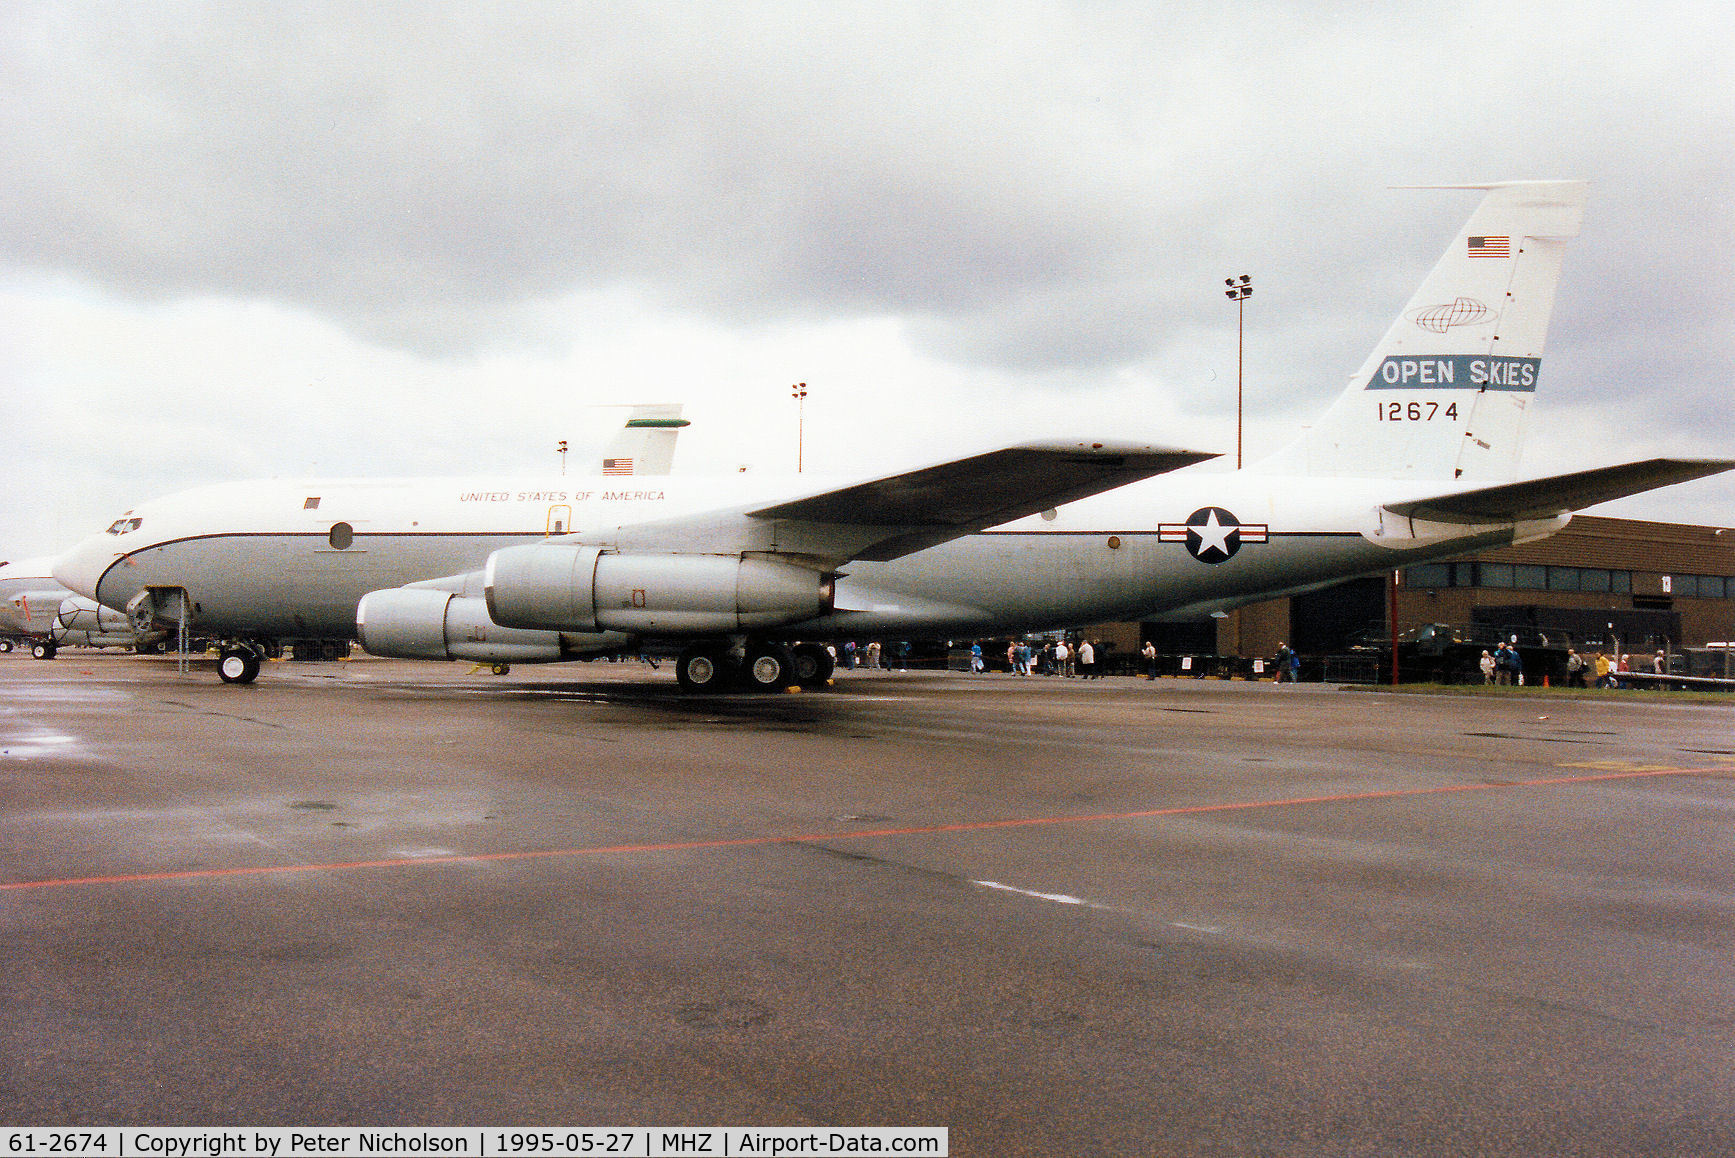 61-2674, 1961 Boeing OC-135B Stratolifter C/N 18350, OC-135B Open Skies aircraft, callsign Cobra 10, of Offutt AFB's 55th Wing on display at the 1995 RAF Mildenhall Air Fete.